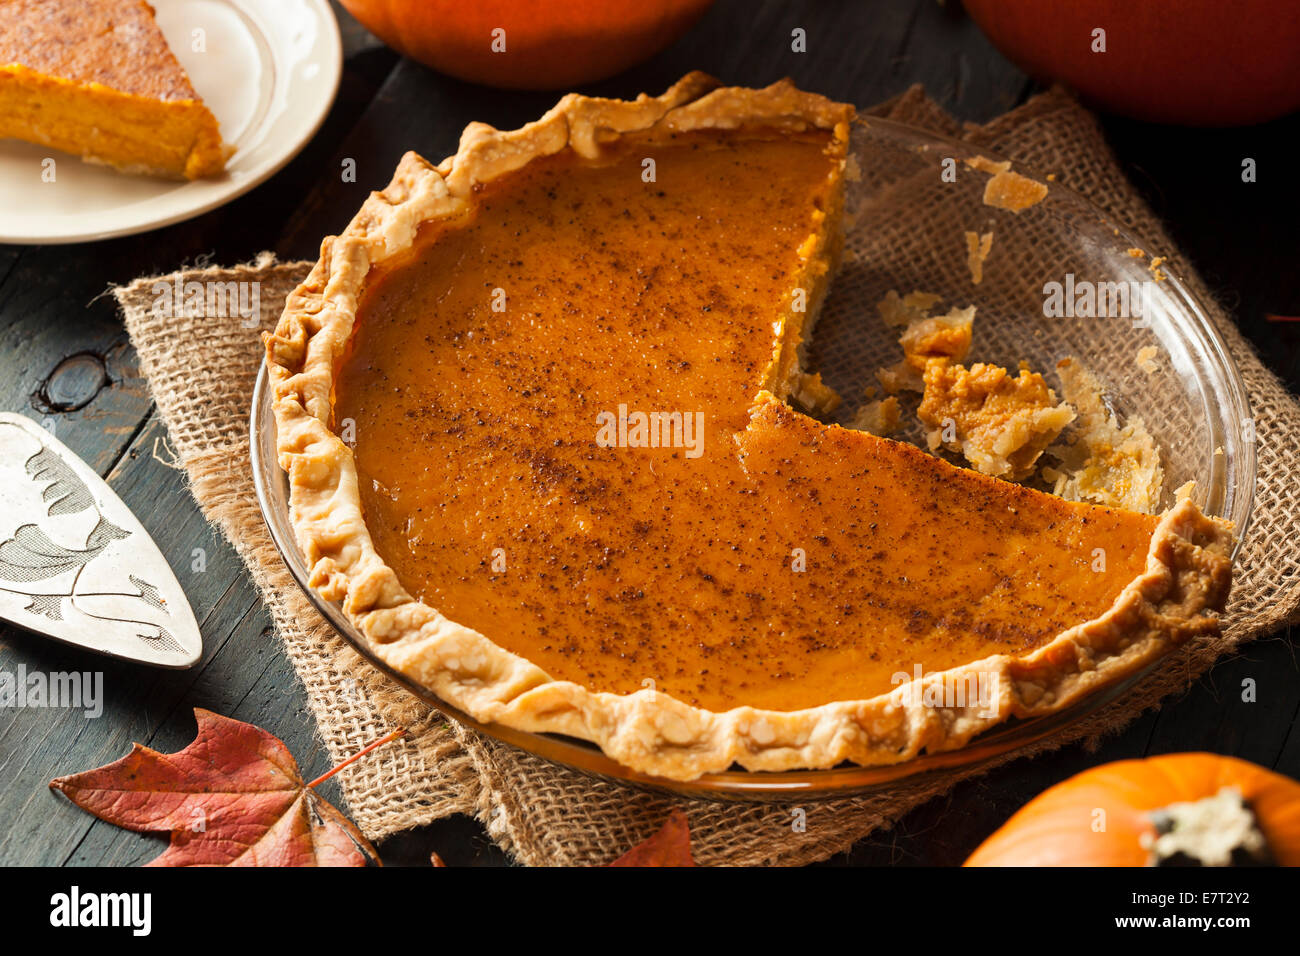 Homemade Pumpkin Pie for Thanksigiving Ready to Eat Stock Photo